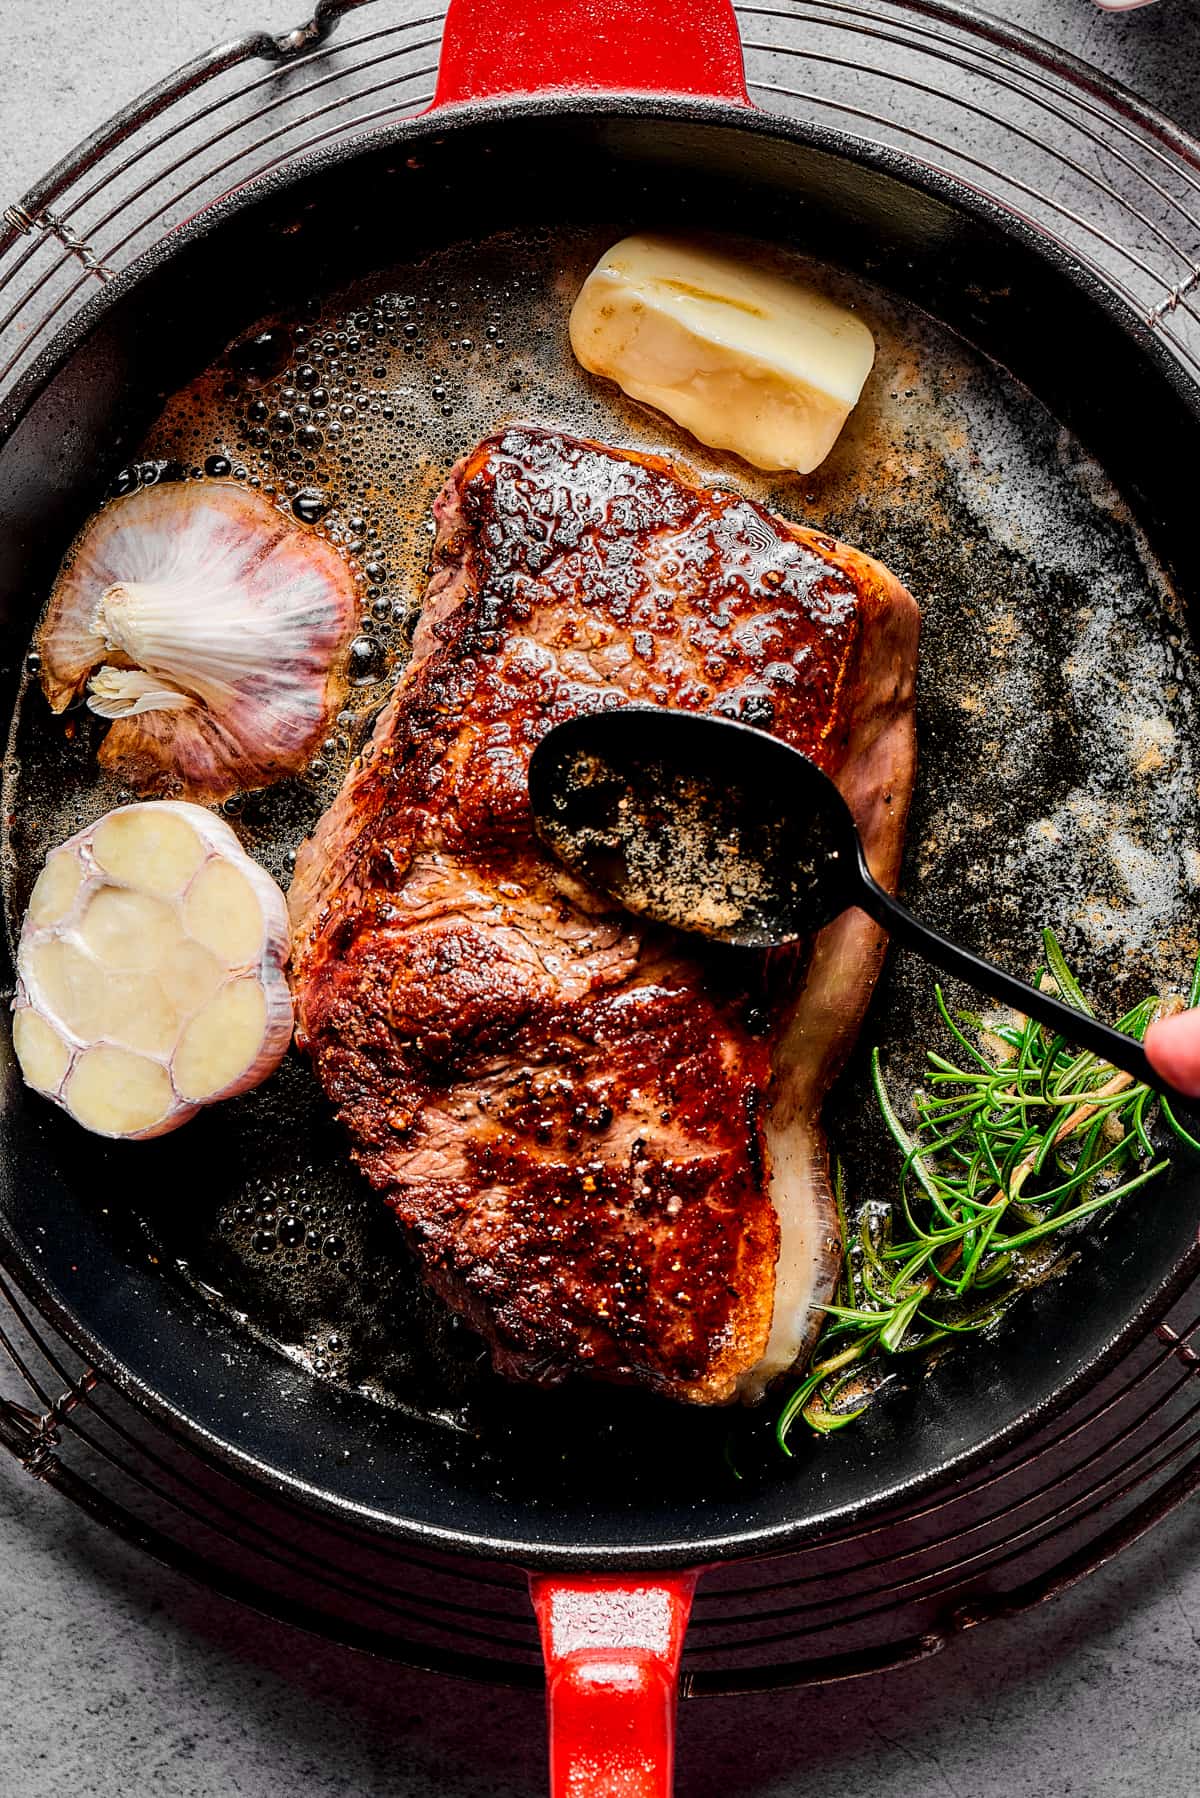 A person's hand basting pan juices over a steak, as the steak cooks in a skillet.